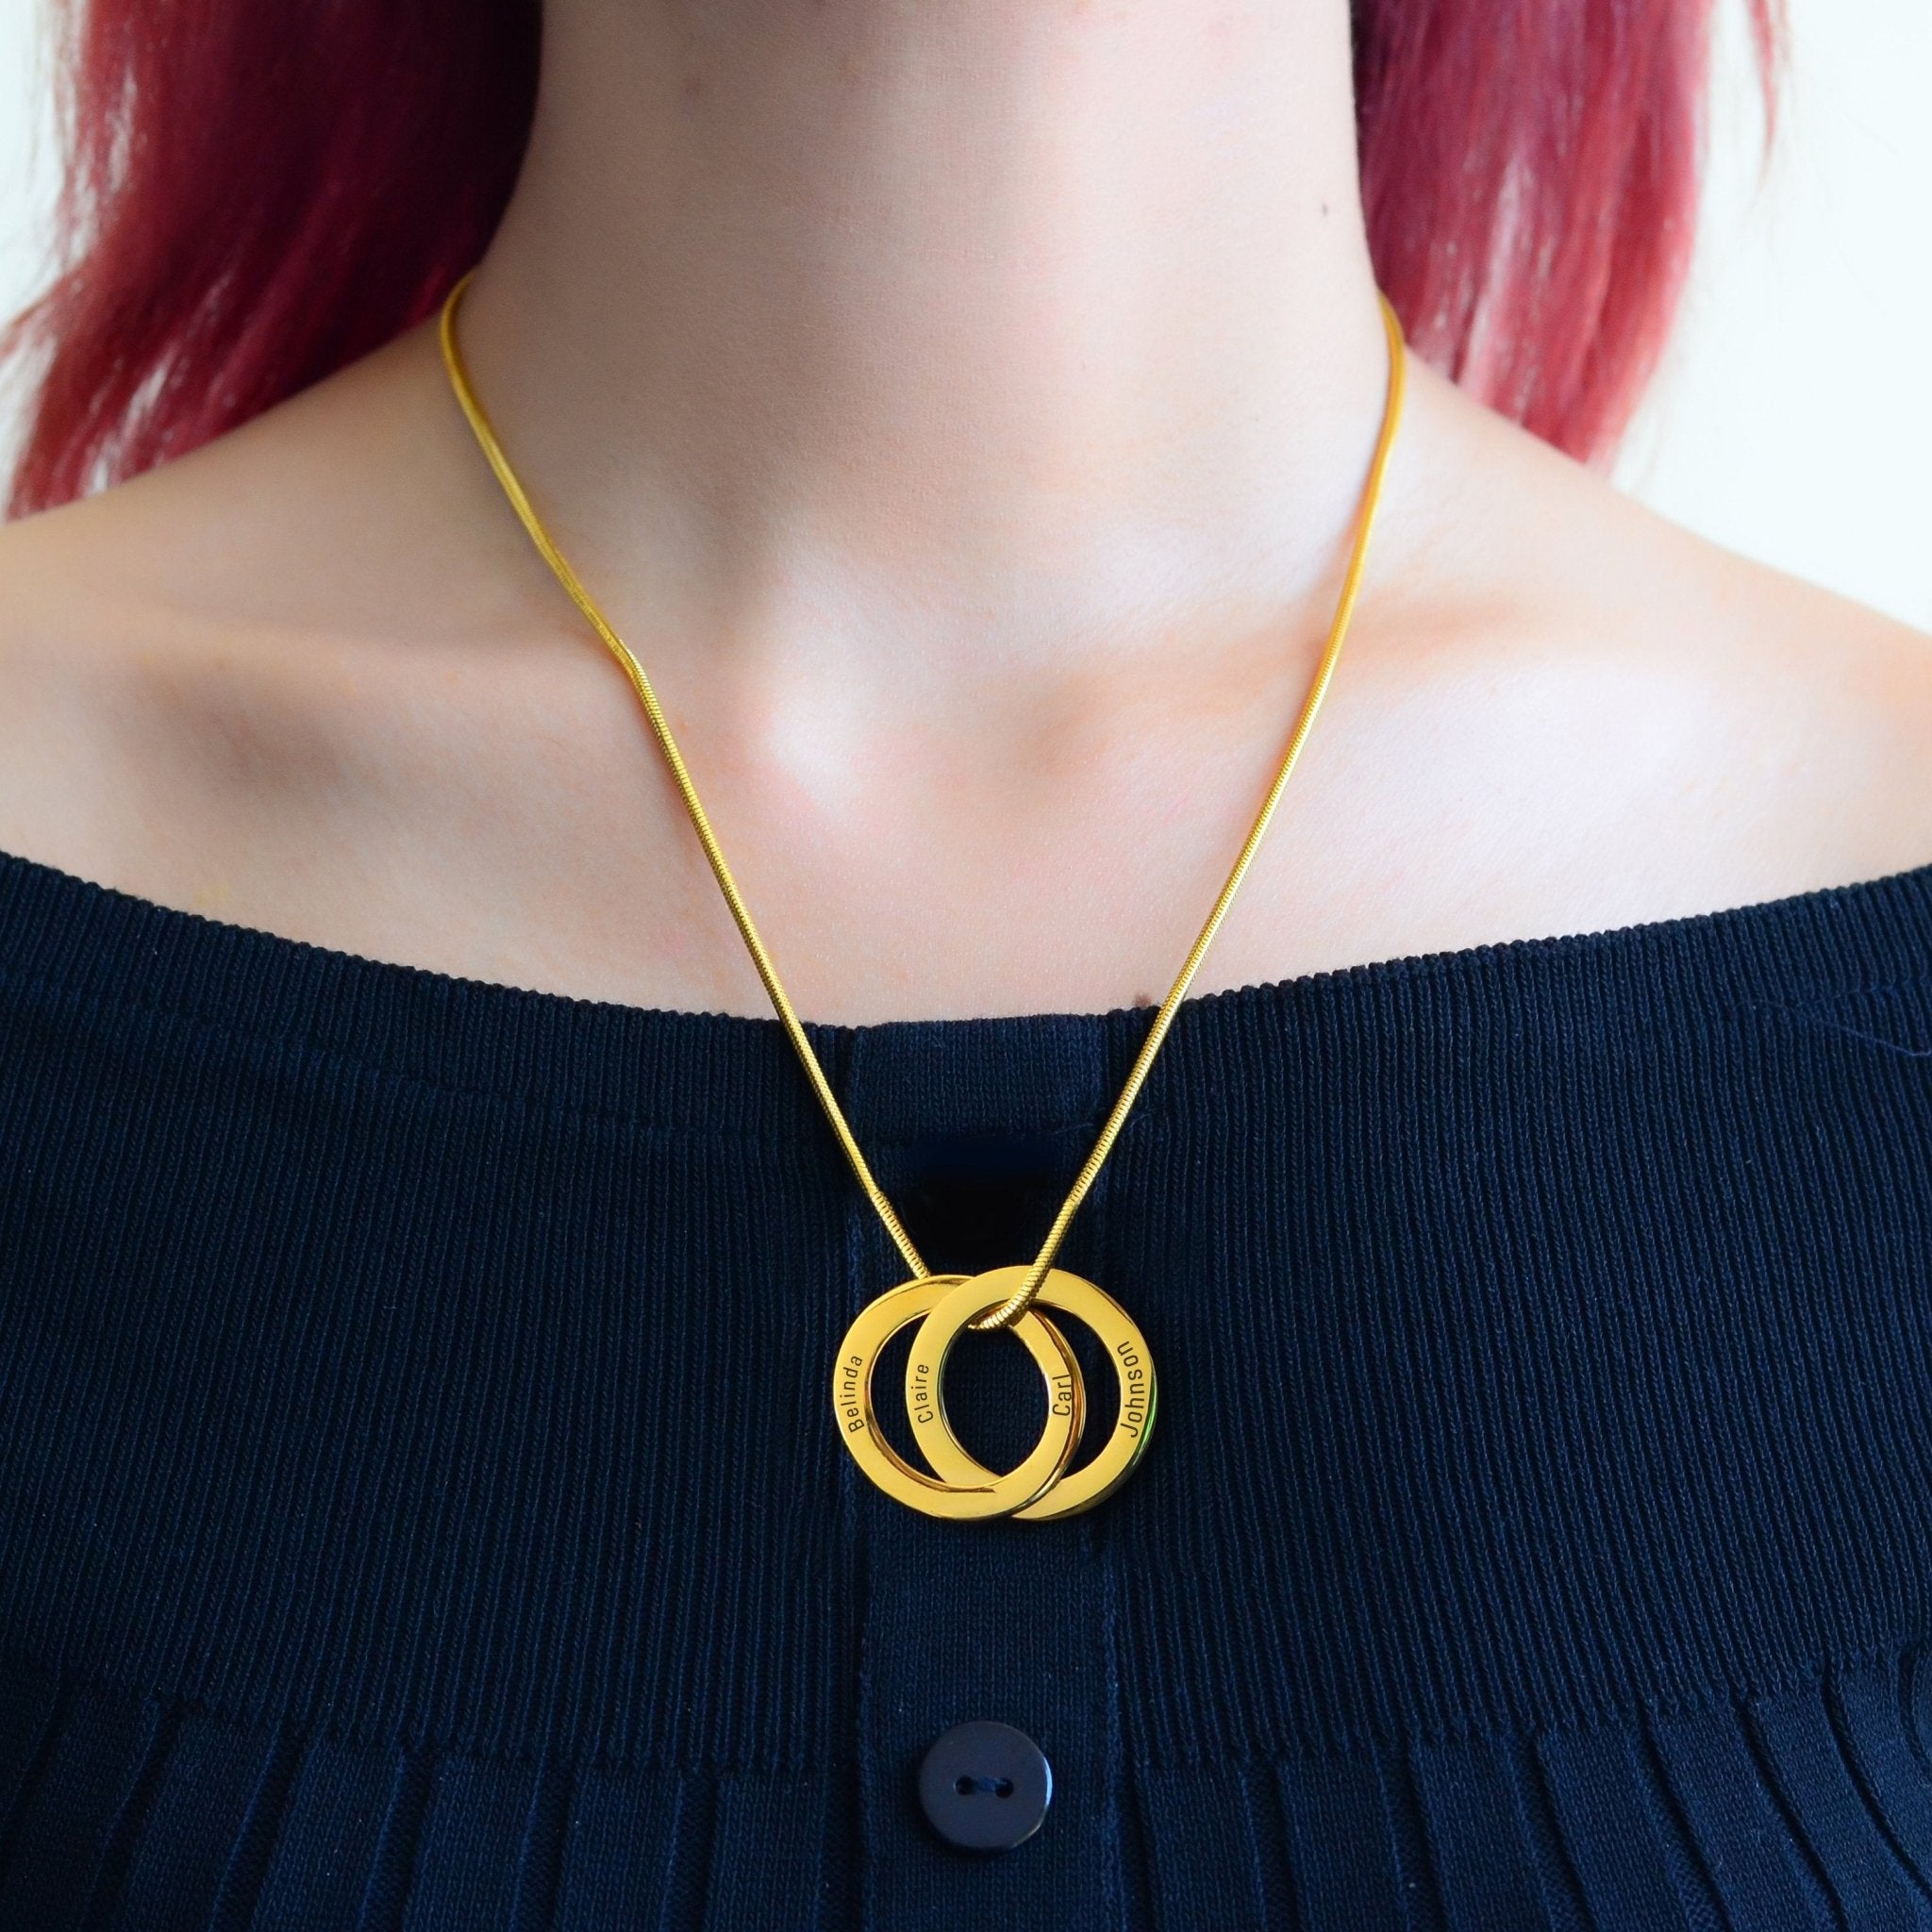 Interlinked Love 2 Rings Necklace - Mothers Jewellery by Belle Fever